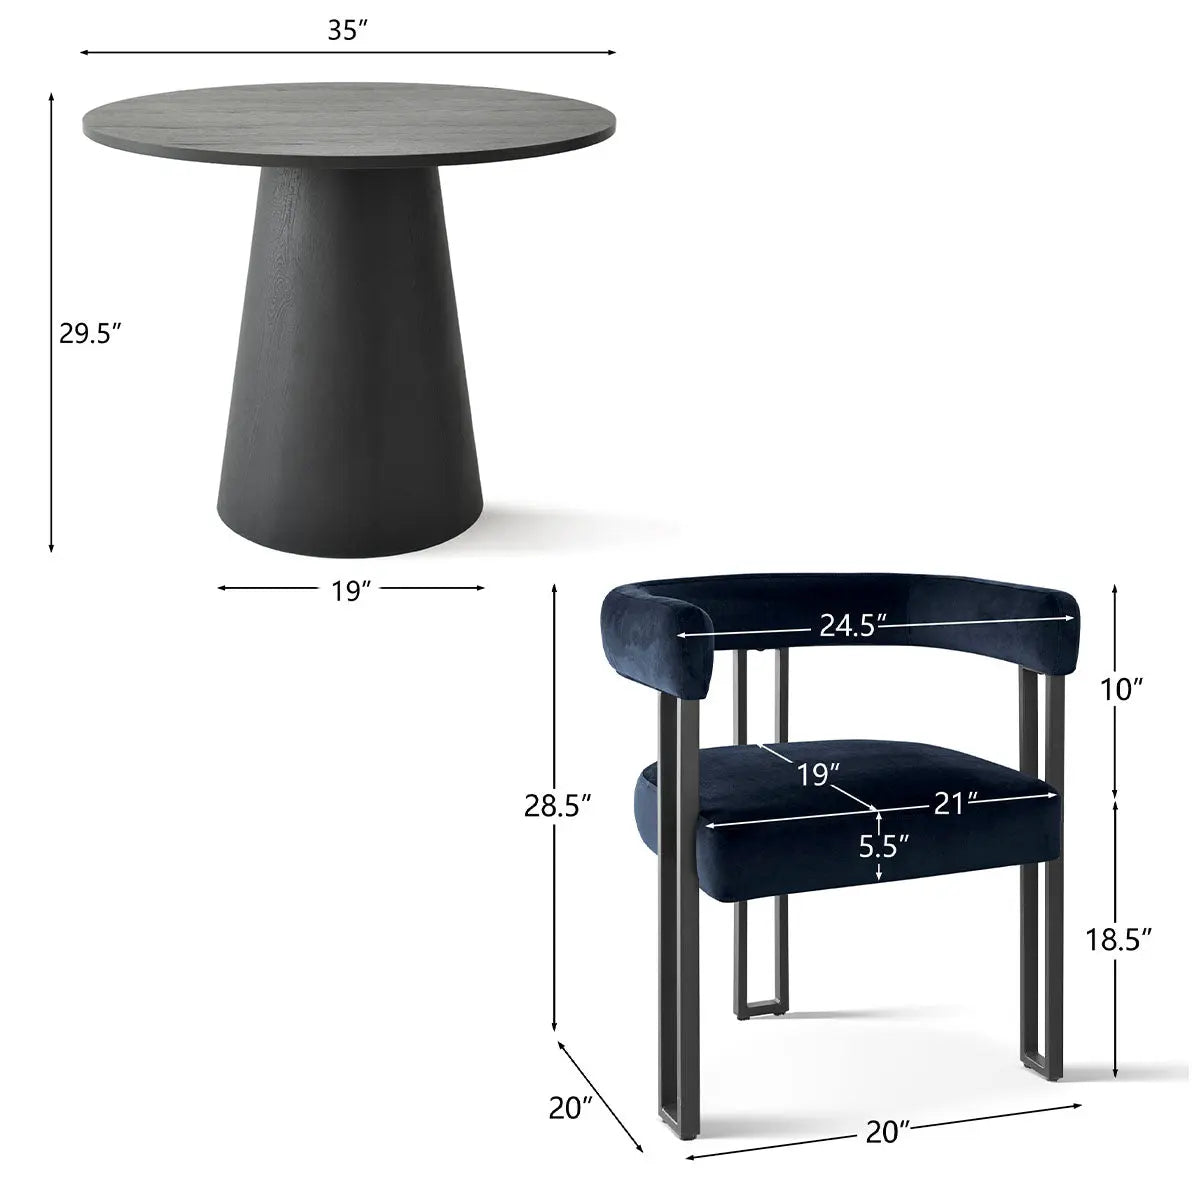 Dwen 35" Chic Black Round Dining Set for 2, With Luxurious Mia Velvet Armchair - Contemporary Design for Small Spaces The Pop Maison